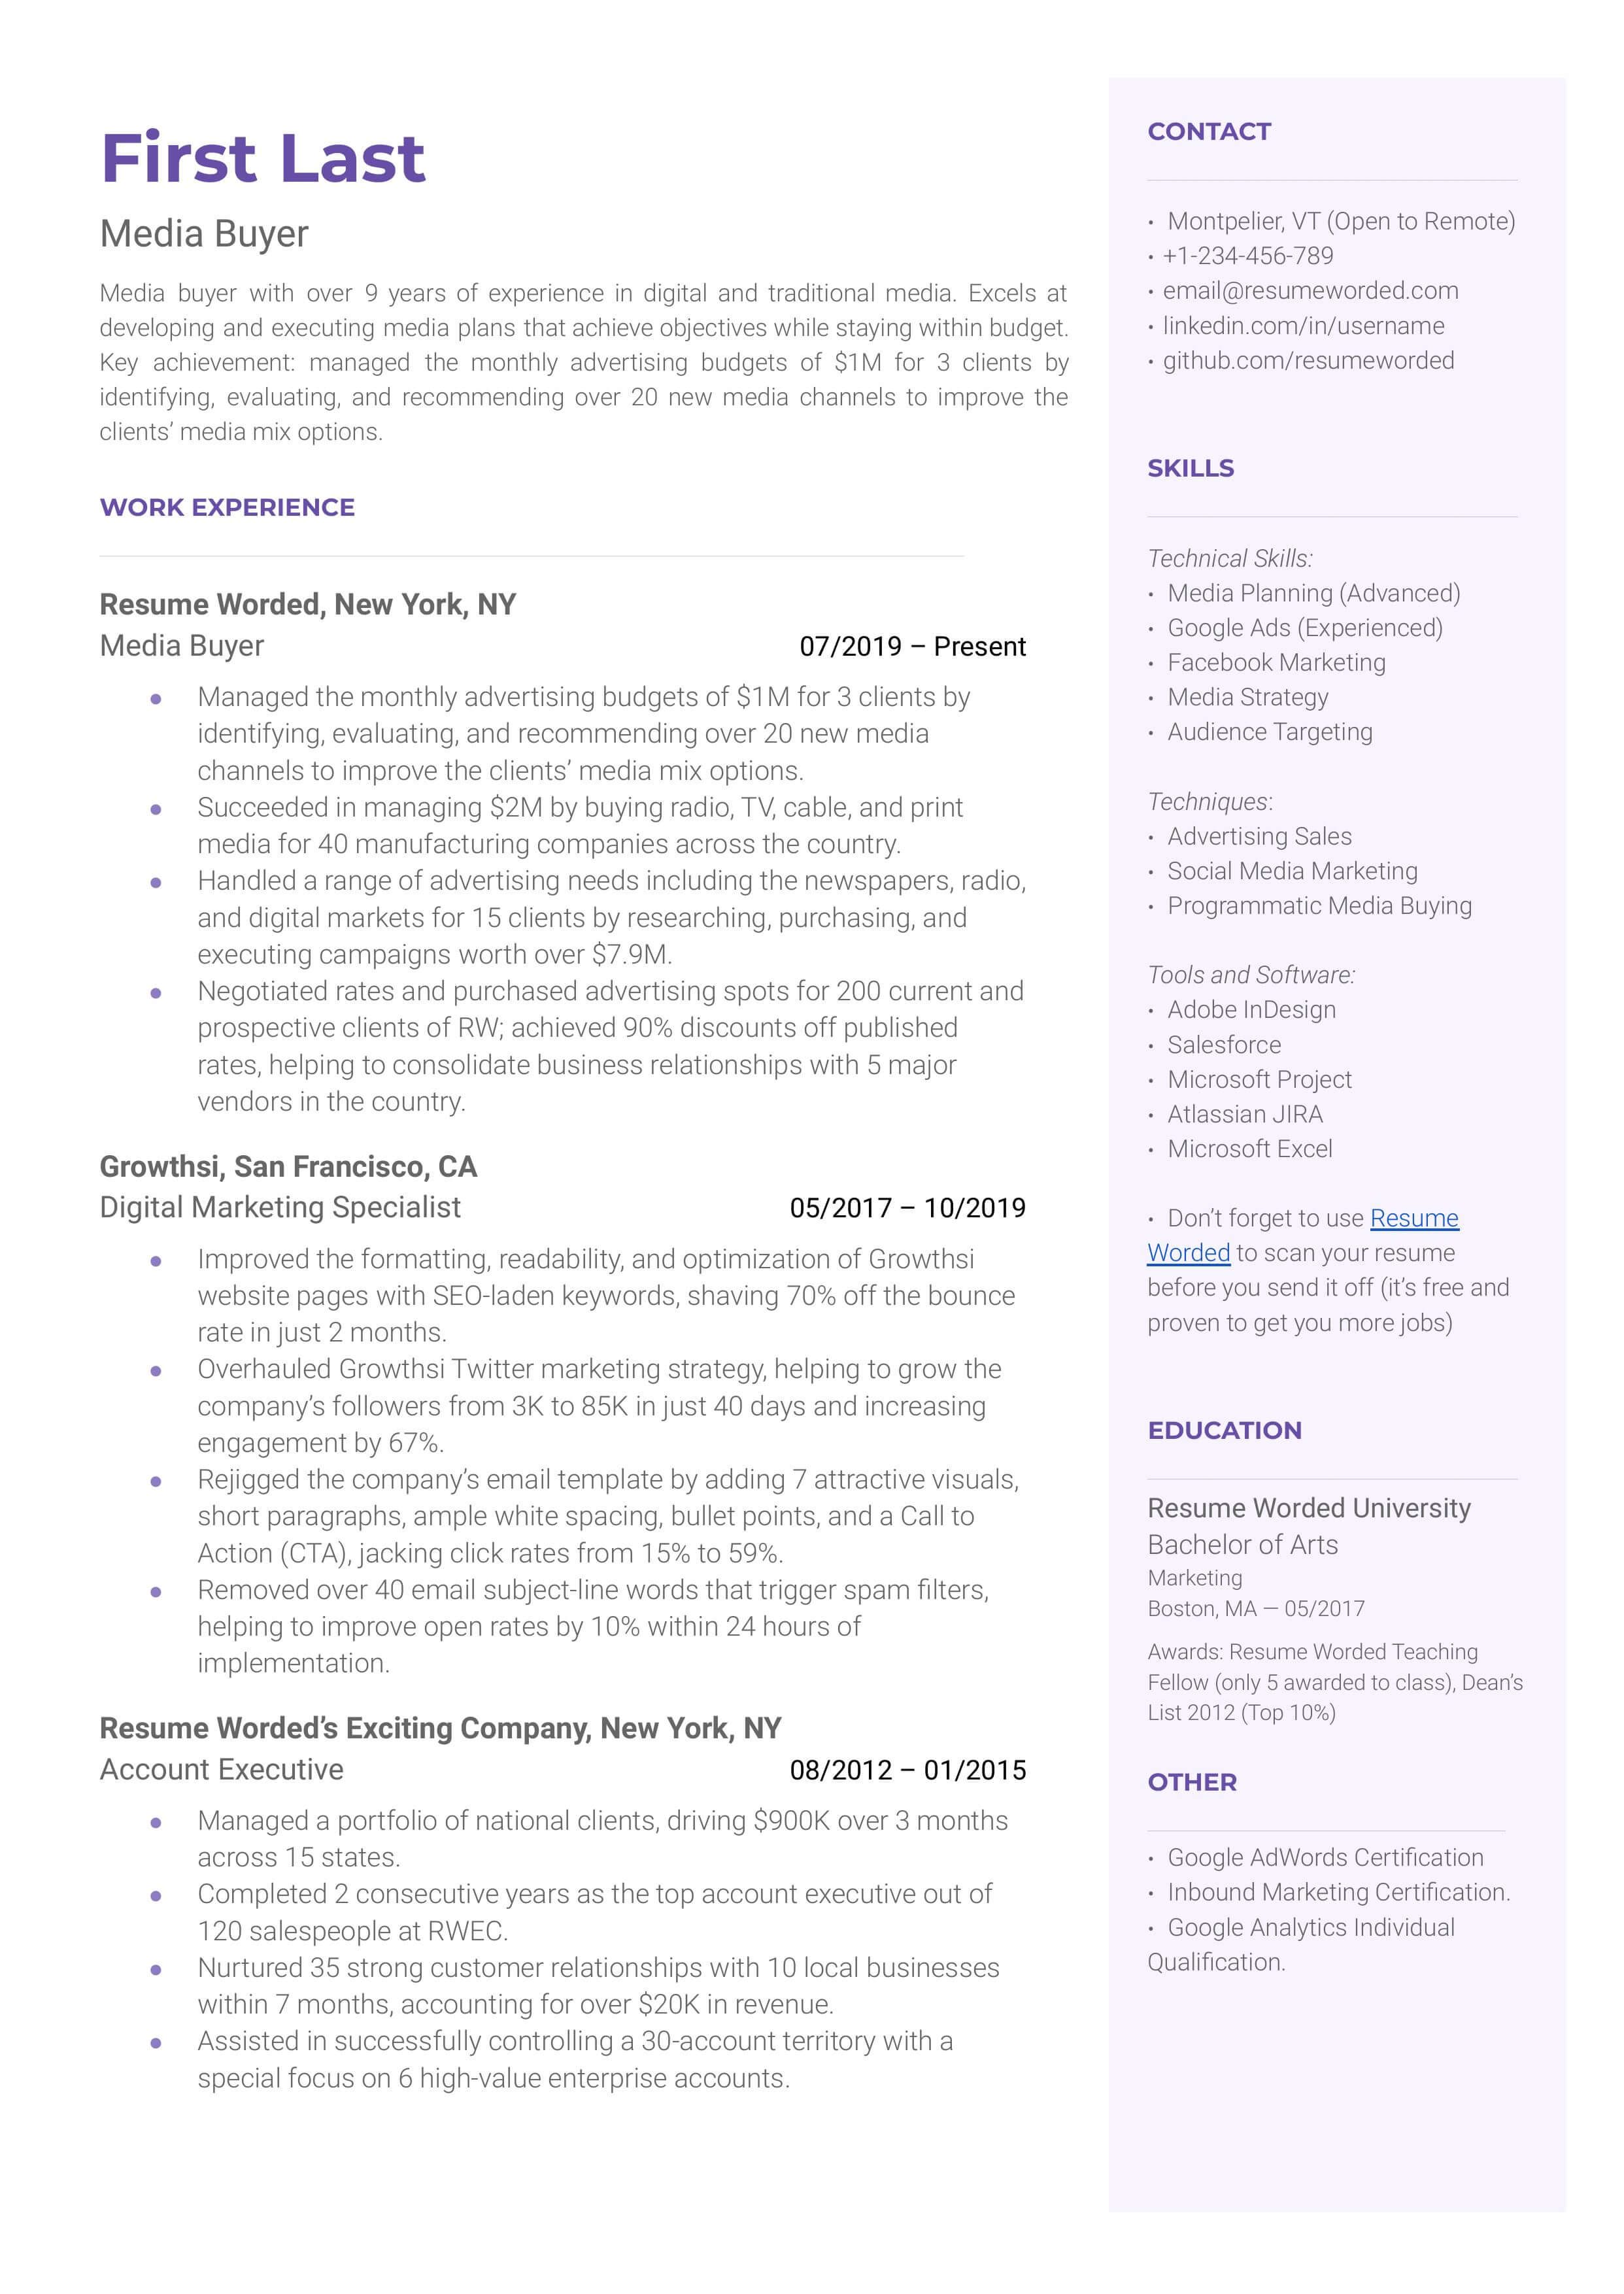 A well-structured CV outlining the media buying experience and skills.